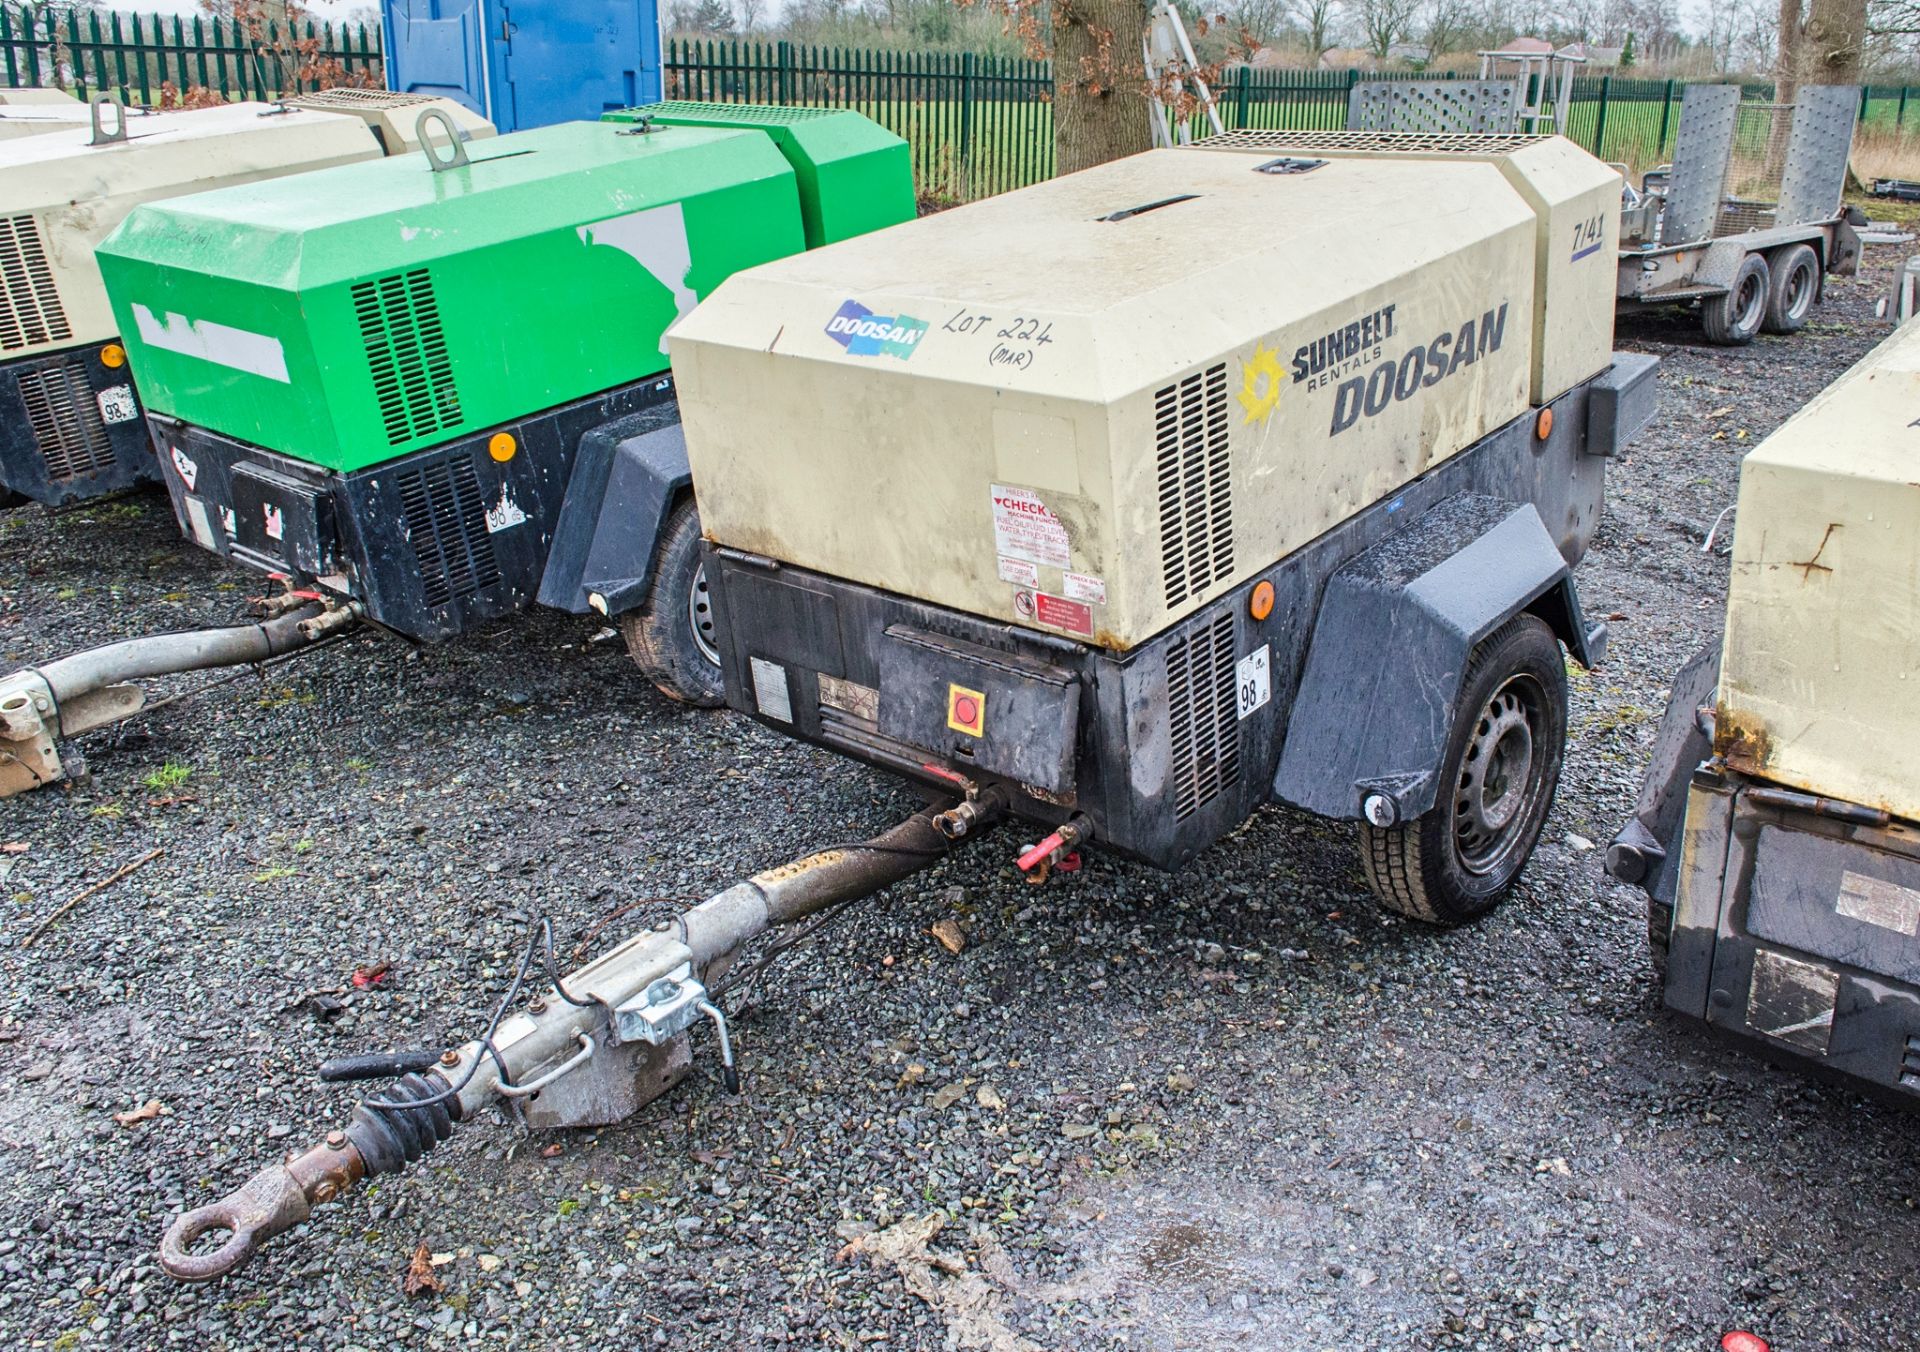 Doosan 7/41 diesel driven fast tow mobile air compressor Year: 2015 S/N: 433704 Recorded Hours: 2113